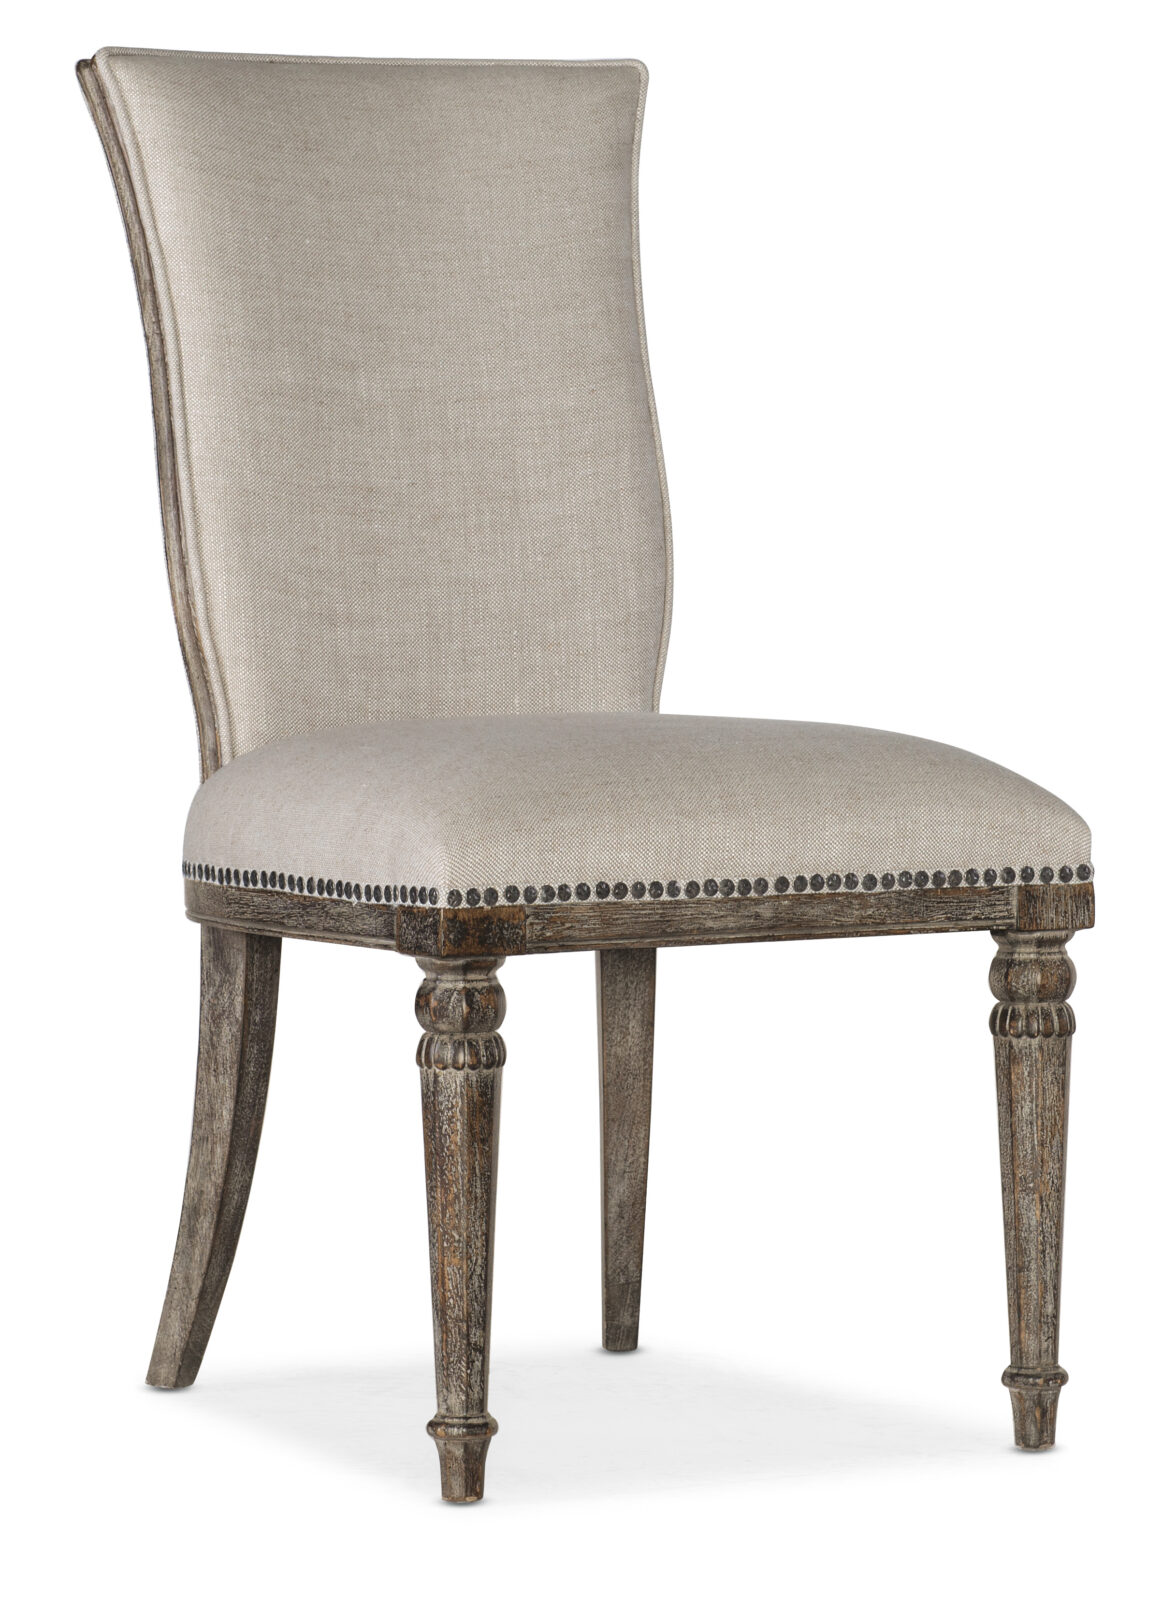 Traditions Upholstered side chair